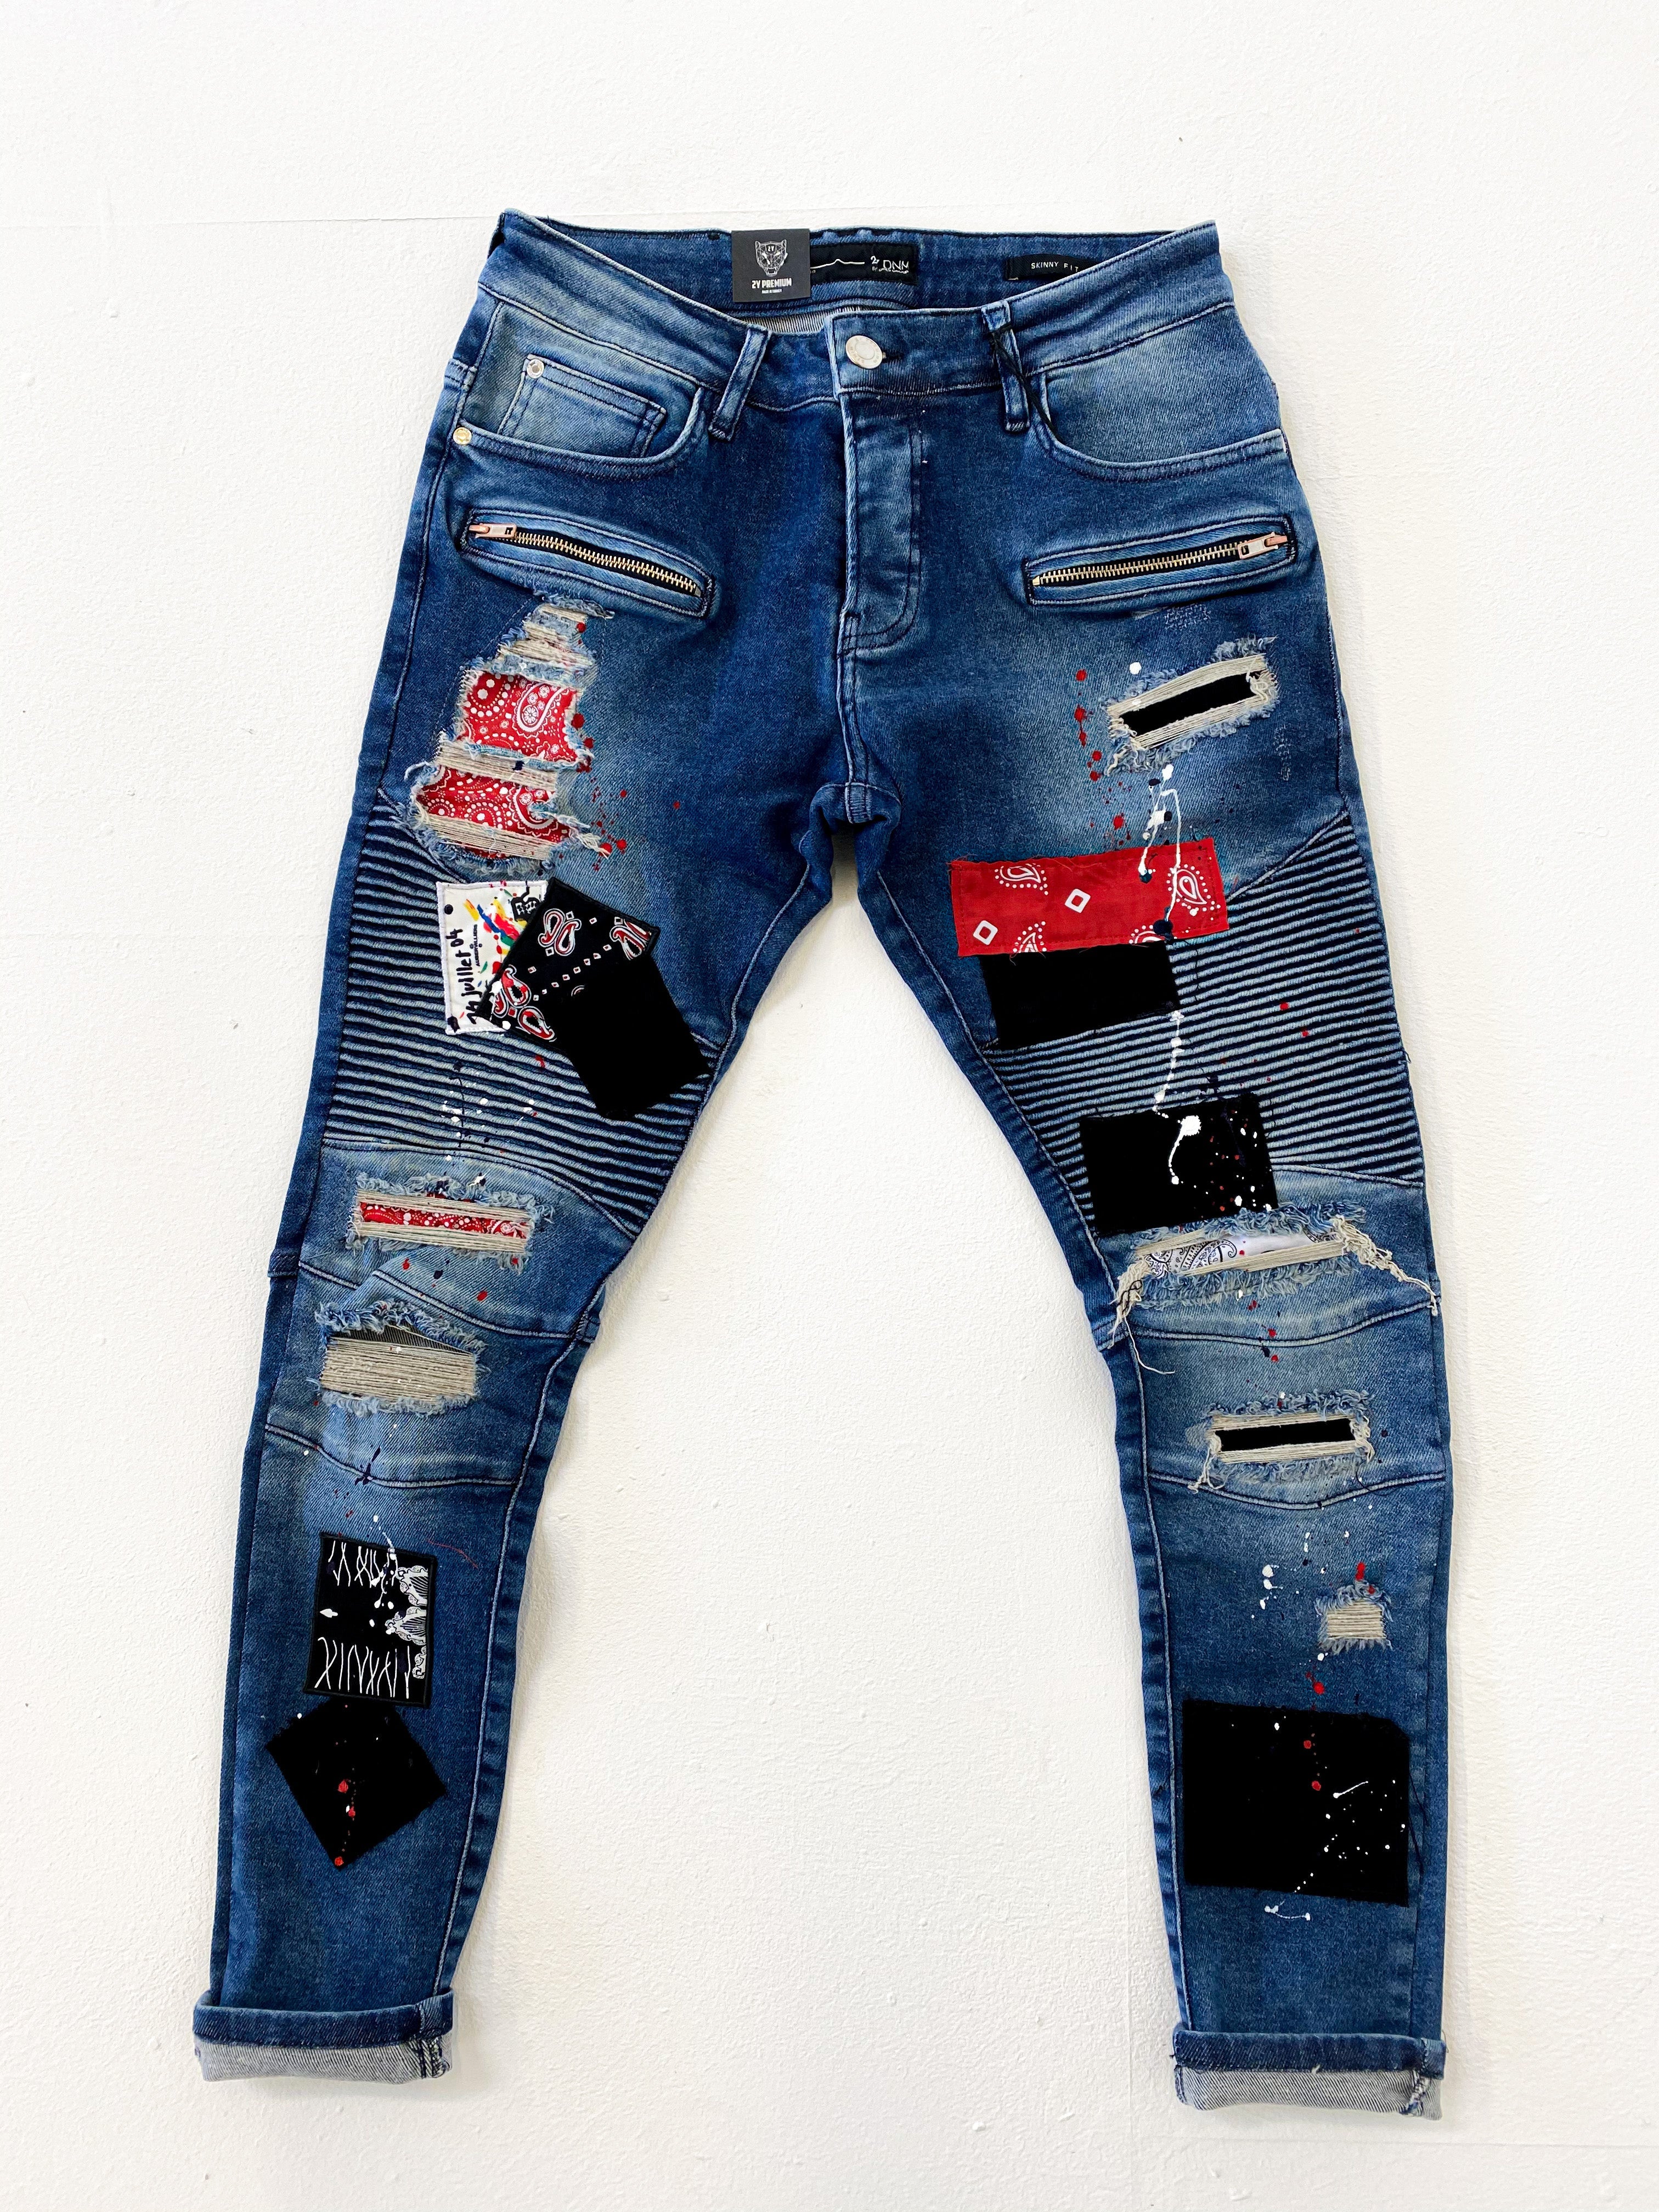 Biker Patched Ripped Blue Jeans - UNEFFECTED STUDIOS® - JEANS - UNEFFECTED